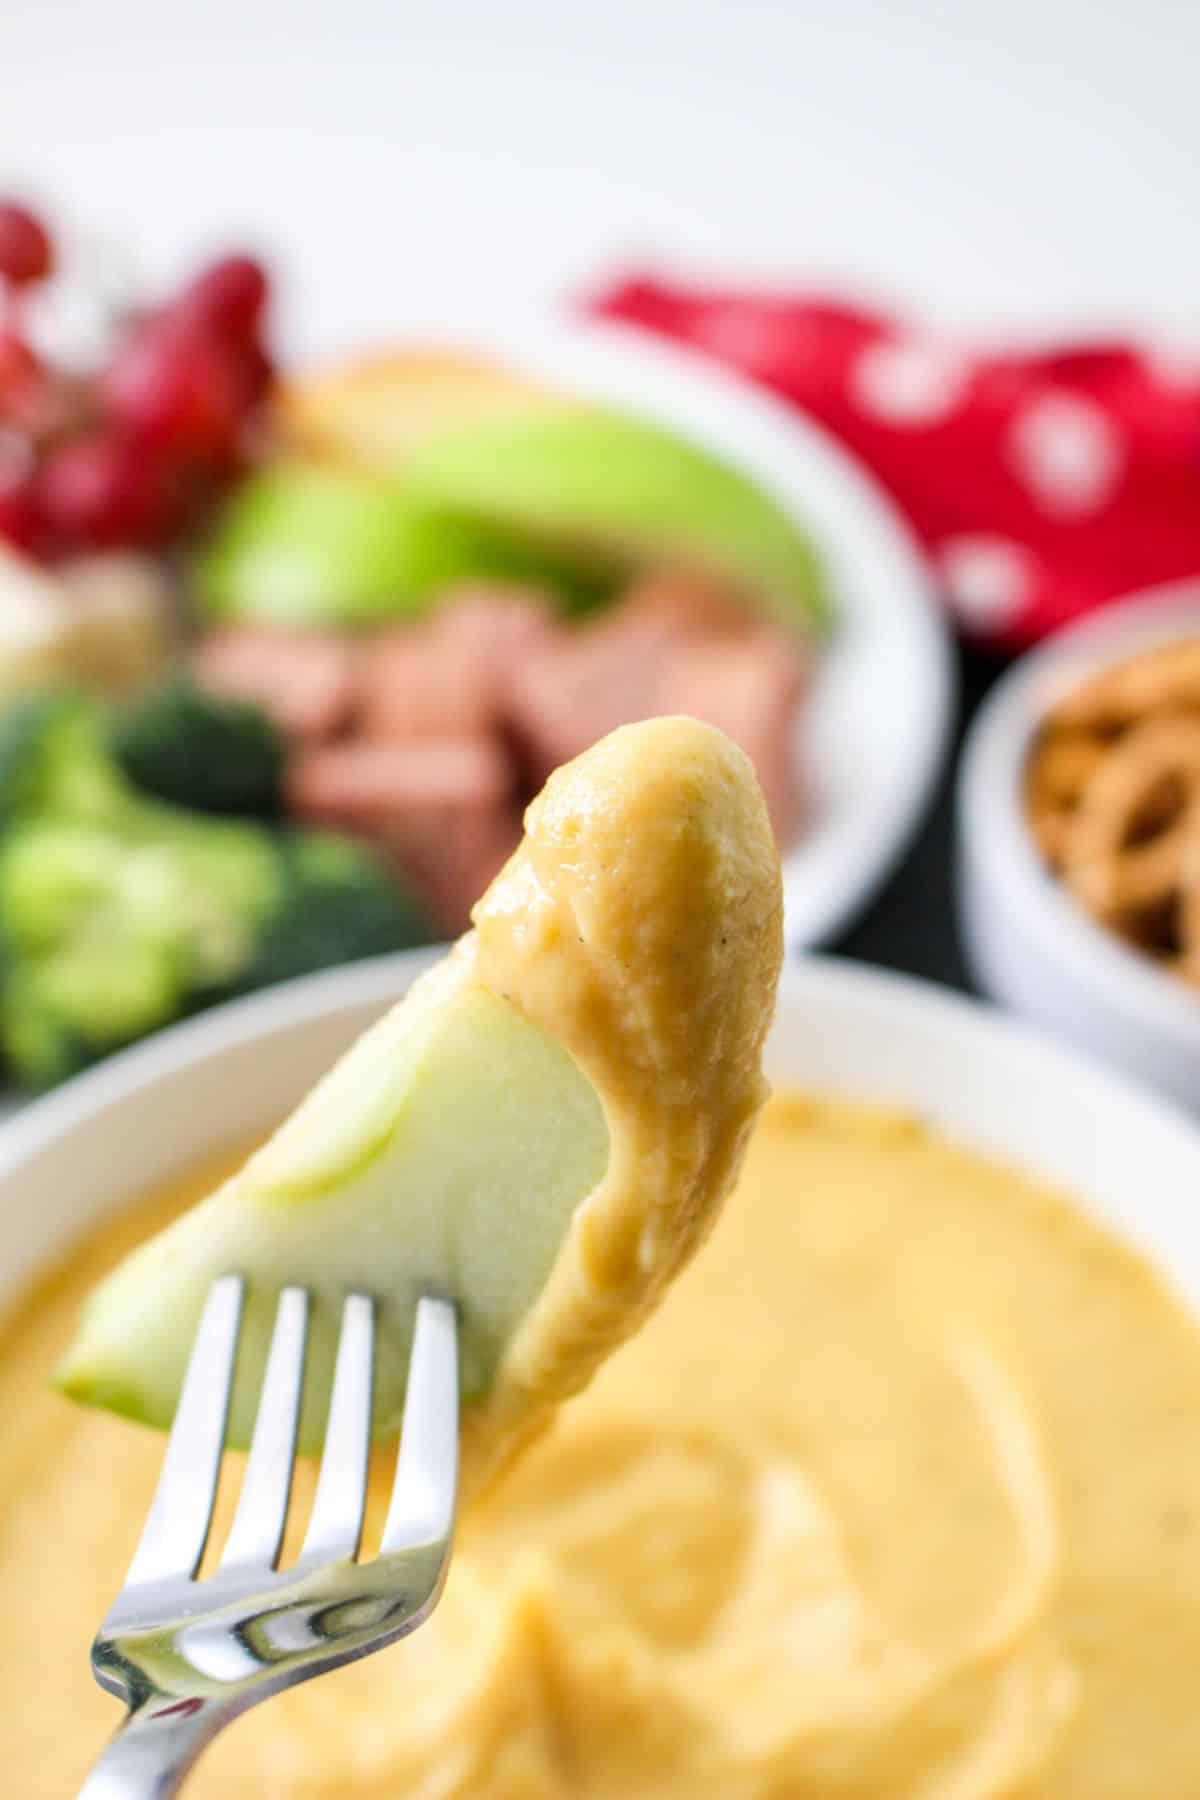 slice of apple on a fork after dipping into cheese sauce.